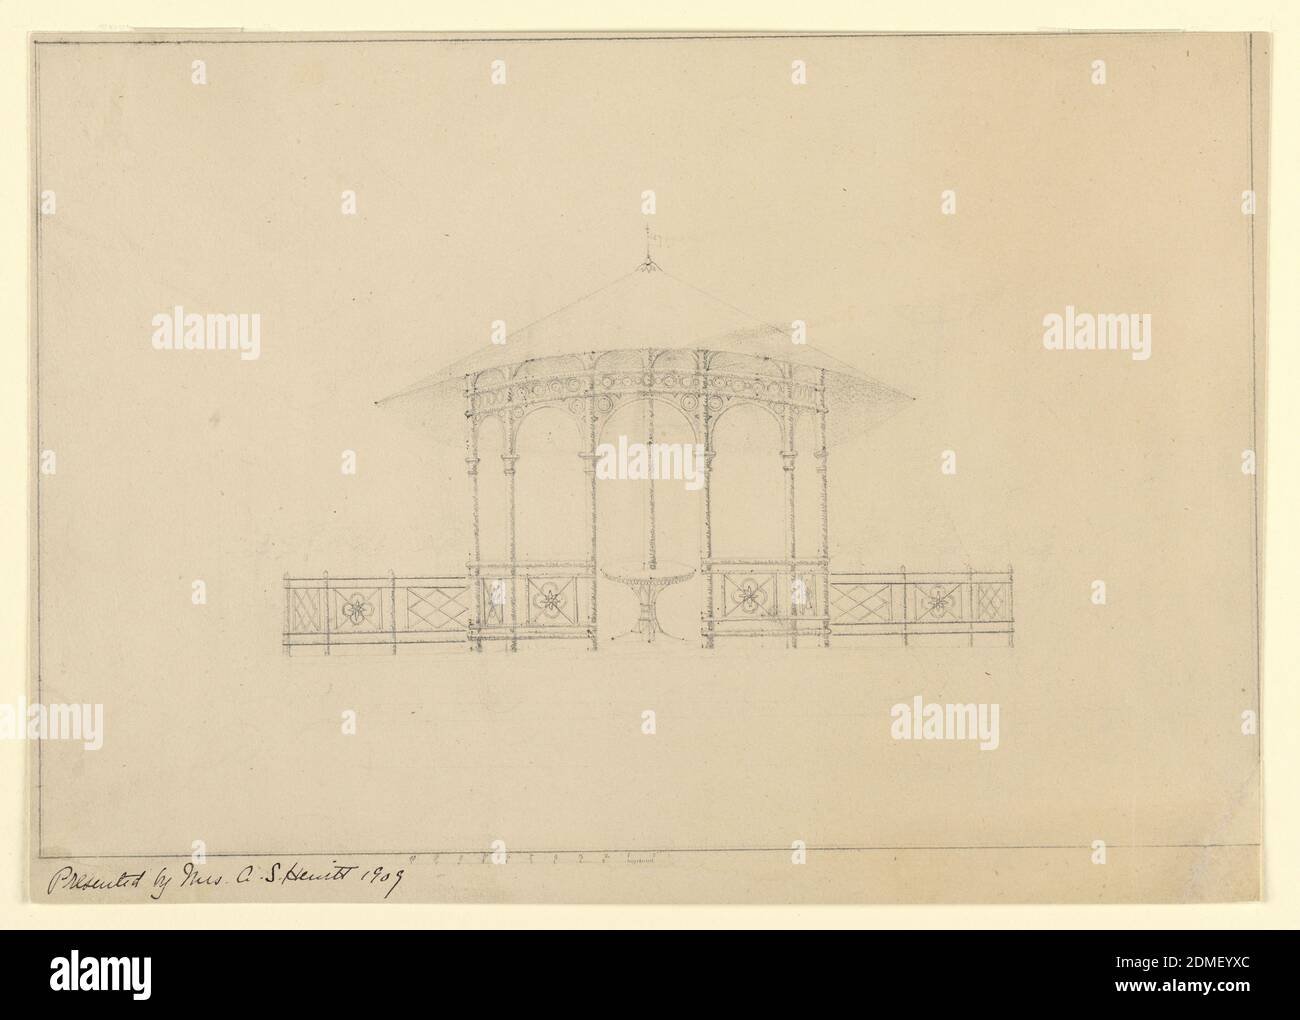 Design for Pagoda in Garden Pavilion, Graphite on wove paper, lined, Conical roof supported by pillars, balustrade decorated with flower motif. Pillar decorated with circular designs. Table drawn in middle of pagoda. Scale noted at bottom., USA, ca. 1909, architecture, Drawing Stock Photo